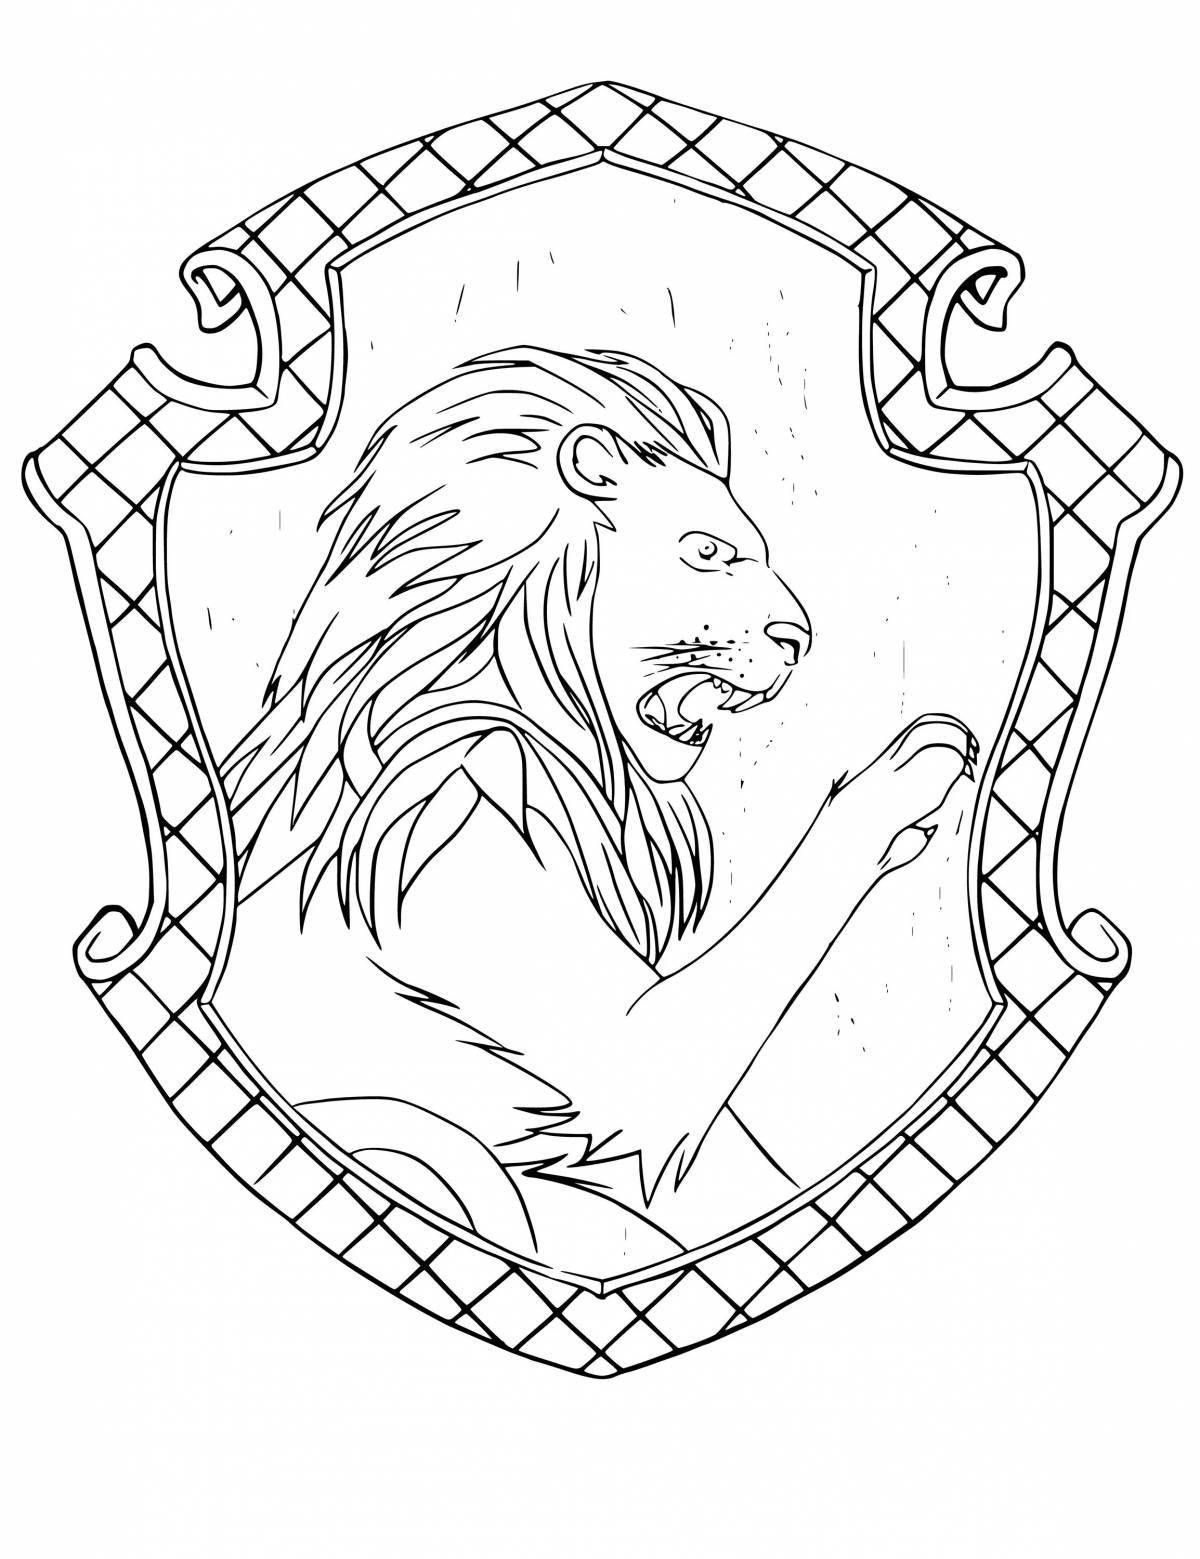 Slytherin crest coloring page